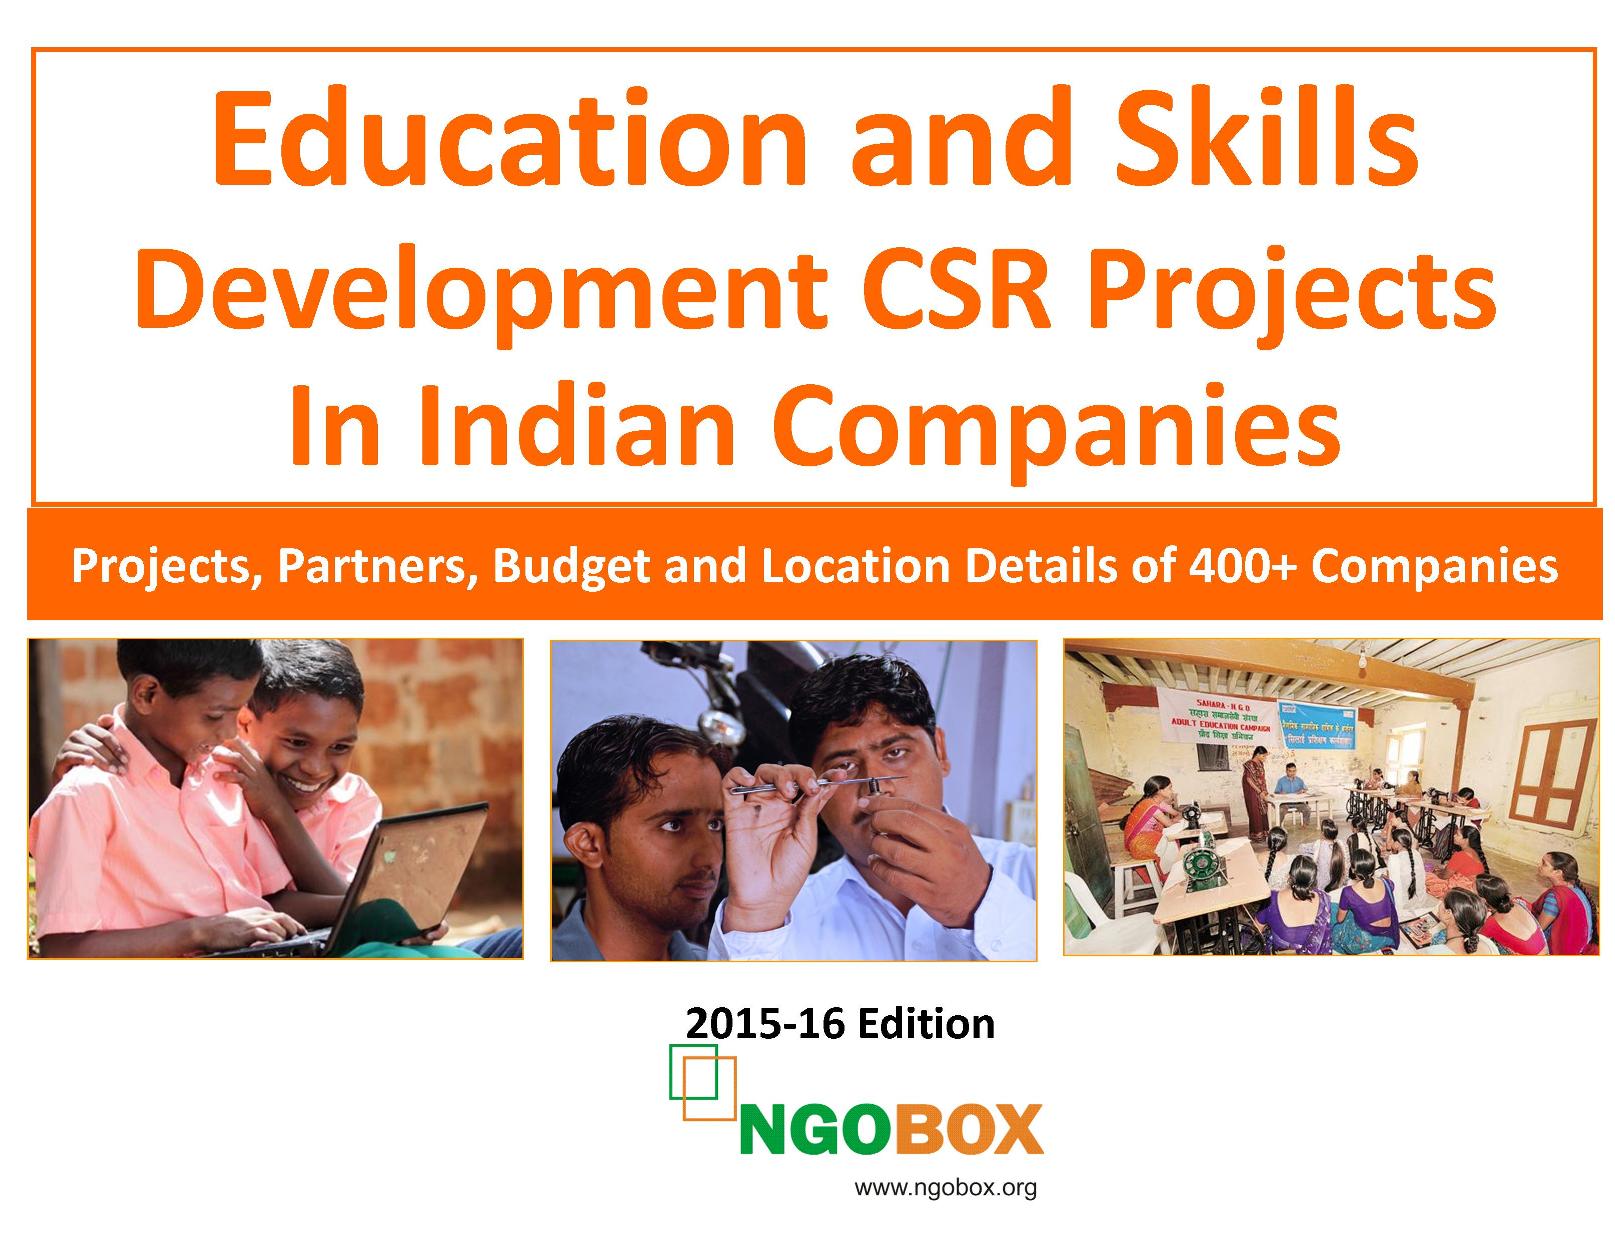 Education and Skills Development CSR Projects in Indian Companies